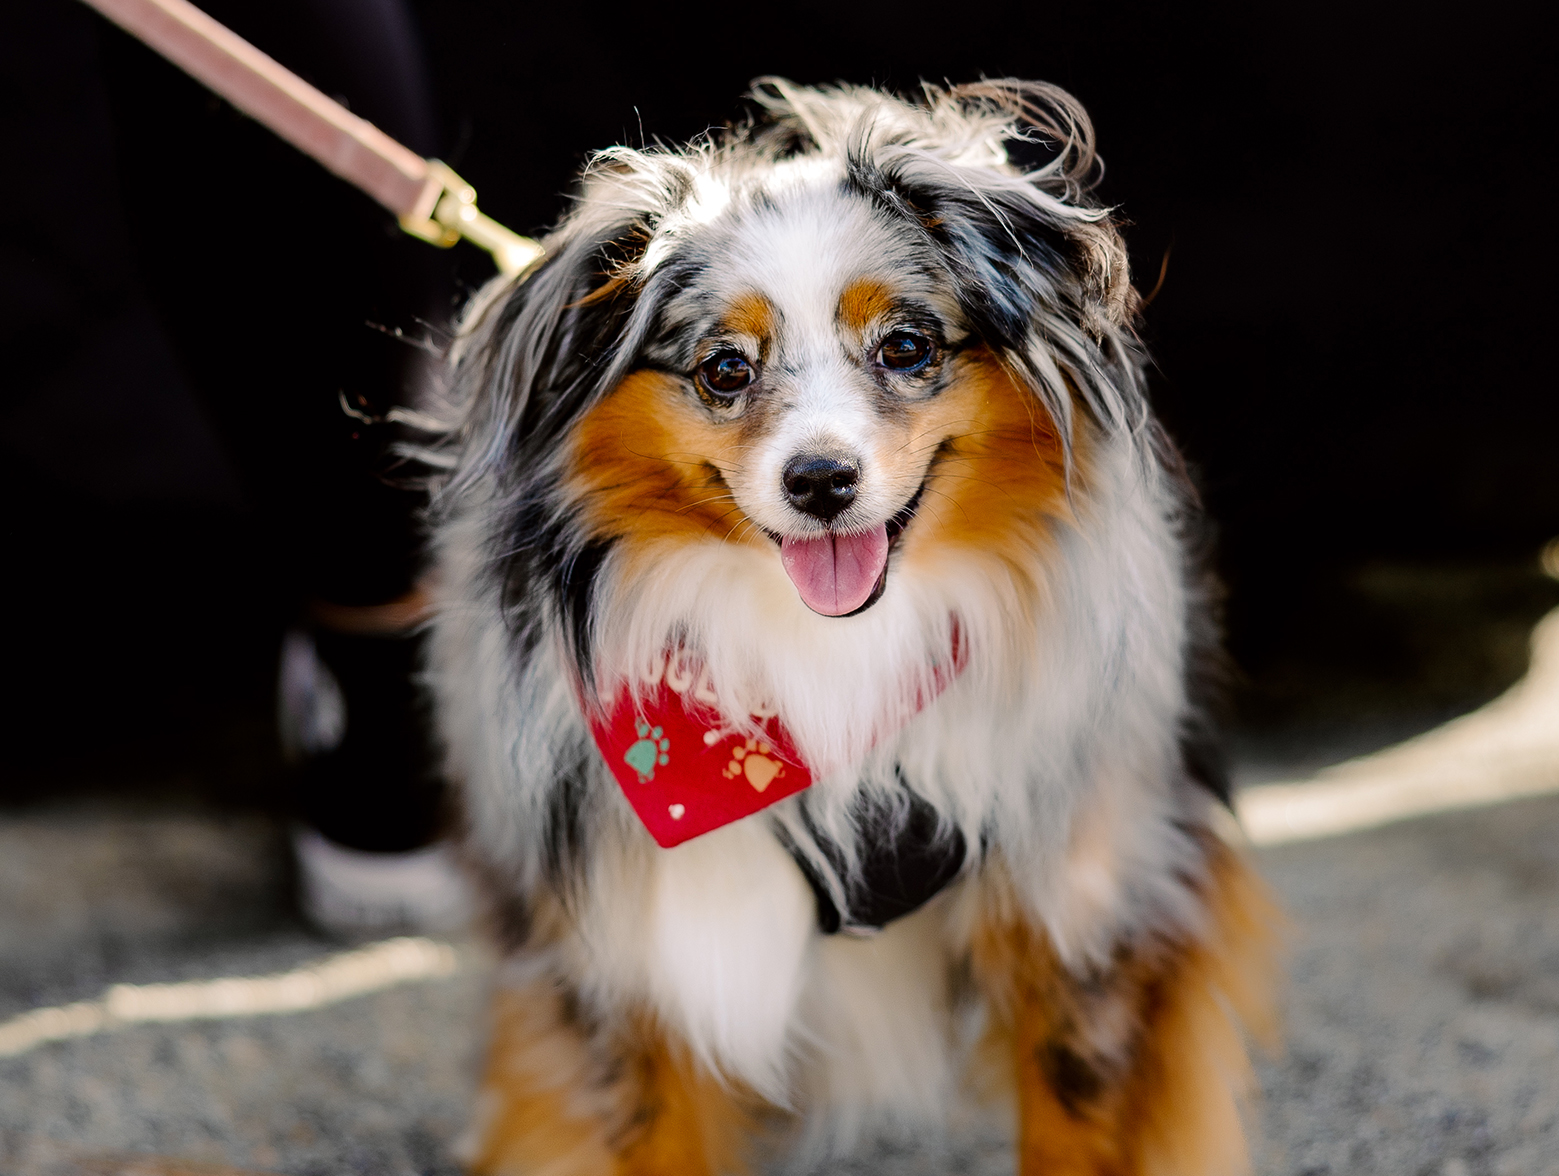 A dog wearing a red and white bandana on a leash.